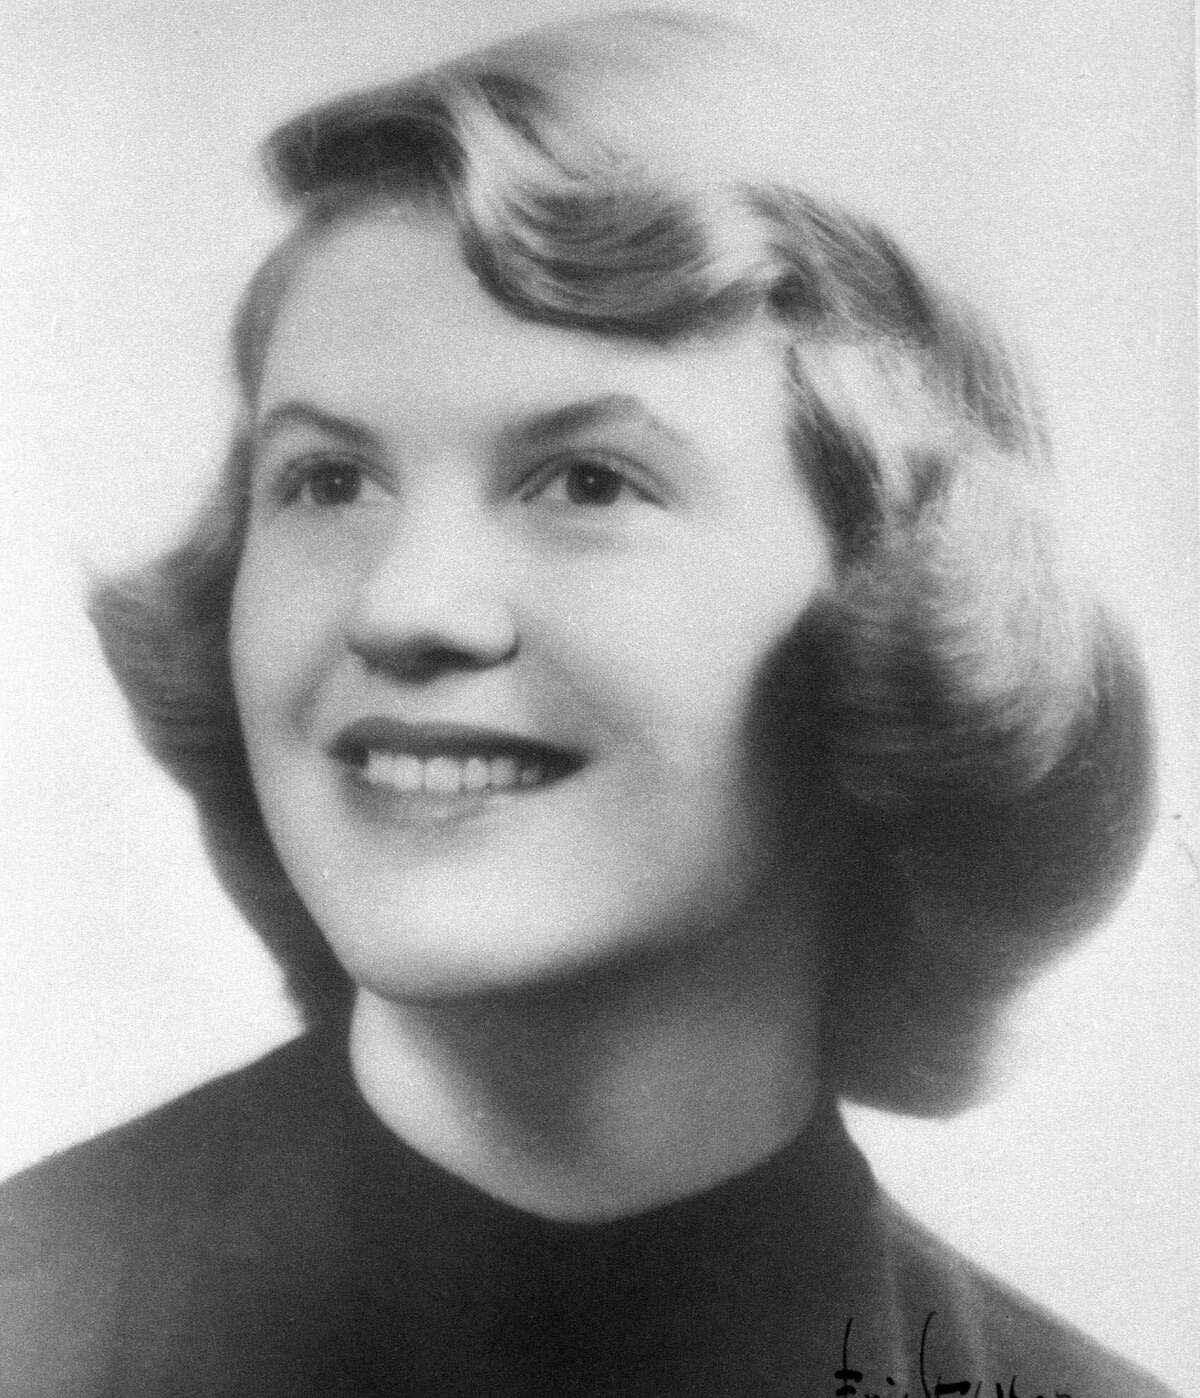 Plath in 1955, photographed at Smith College in Northampton, Mass.